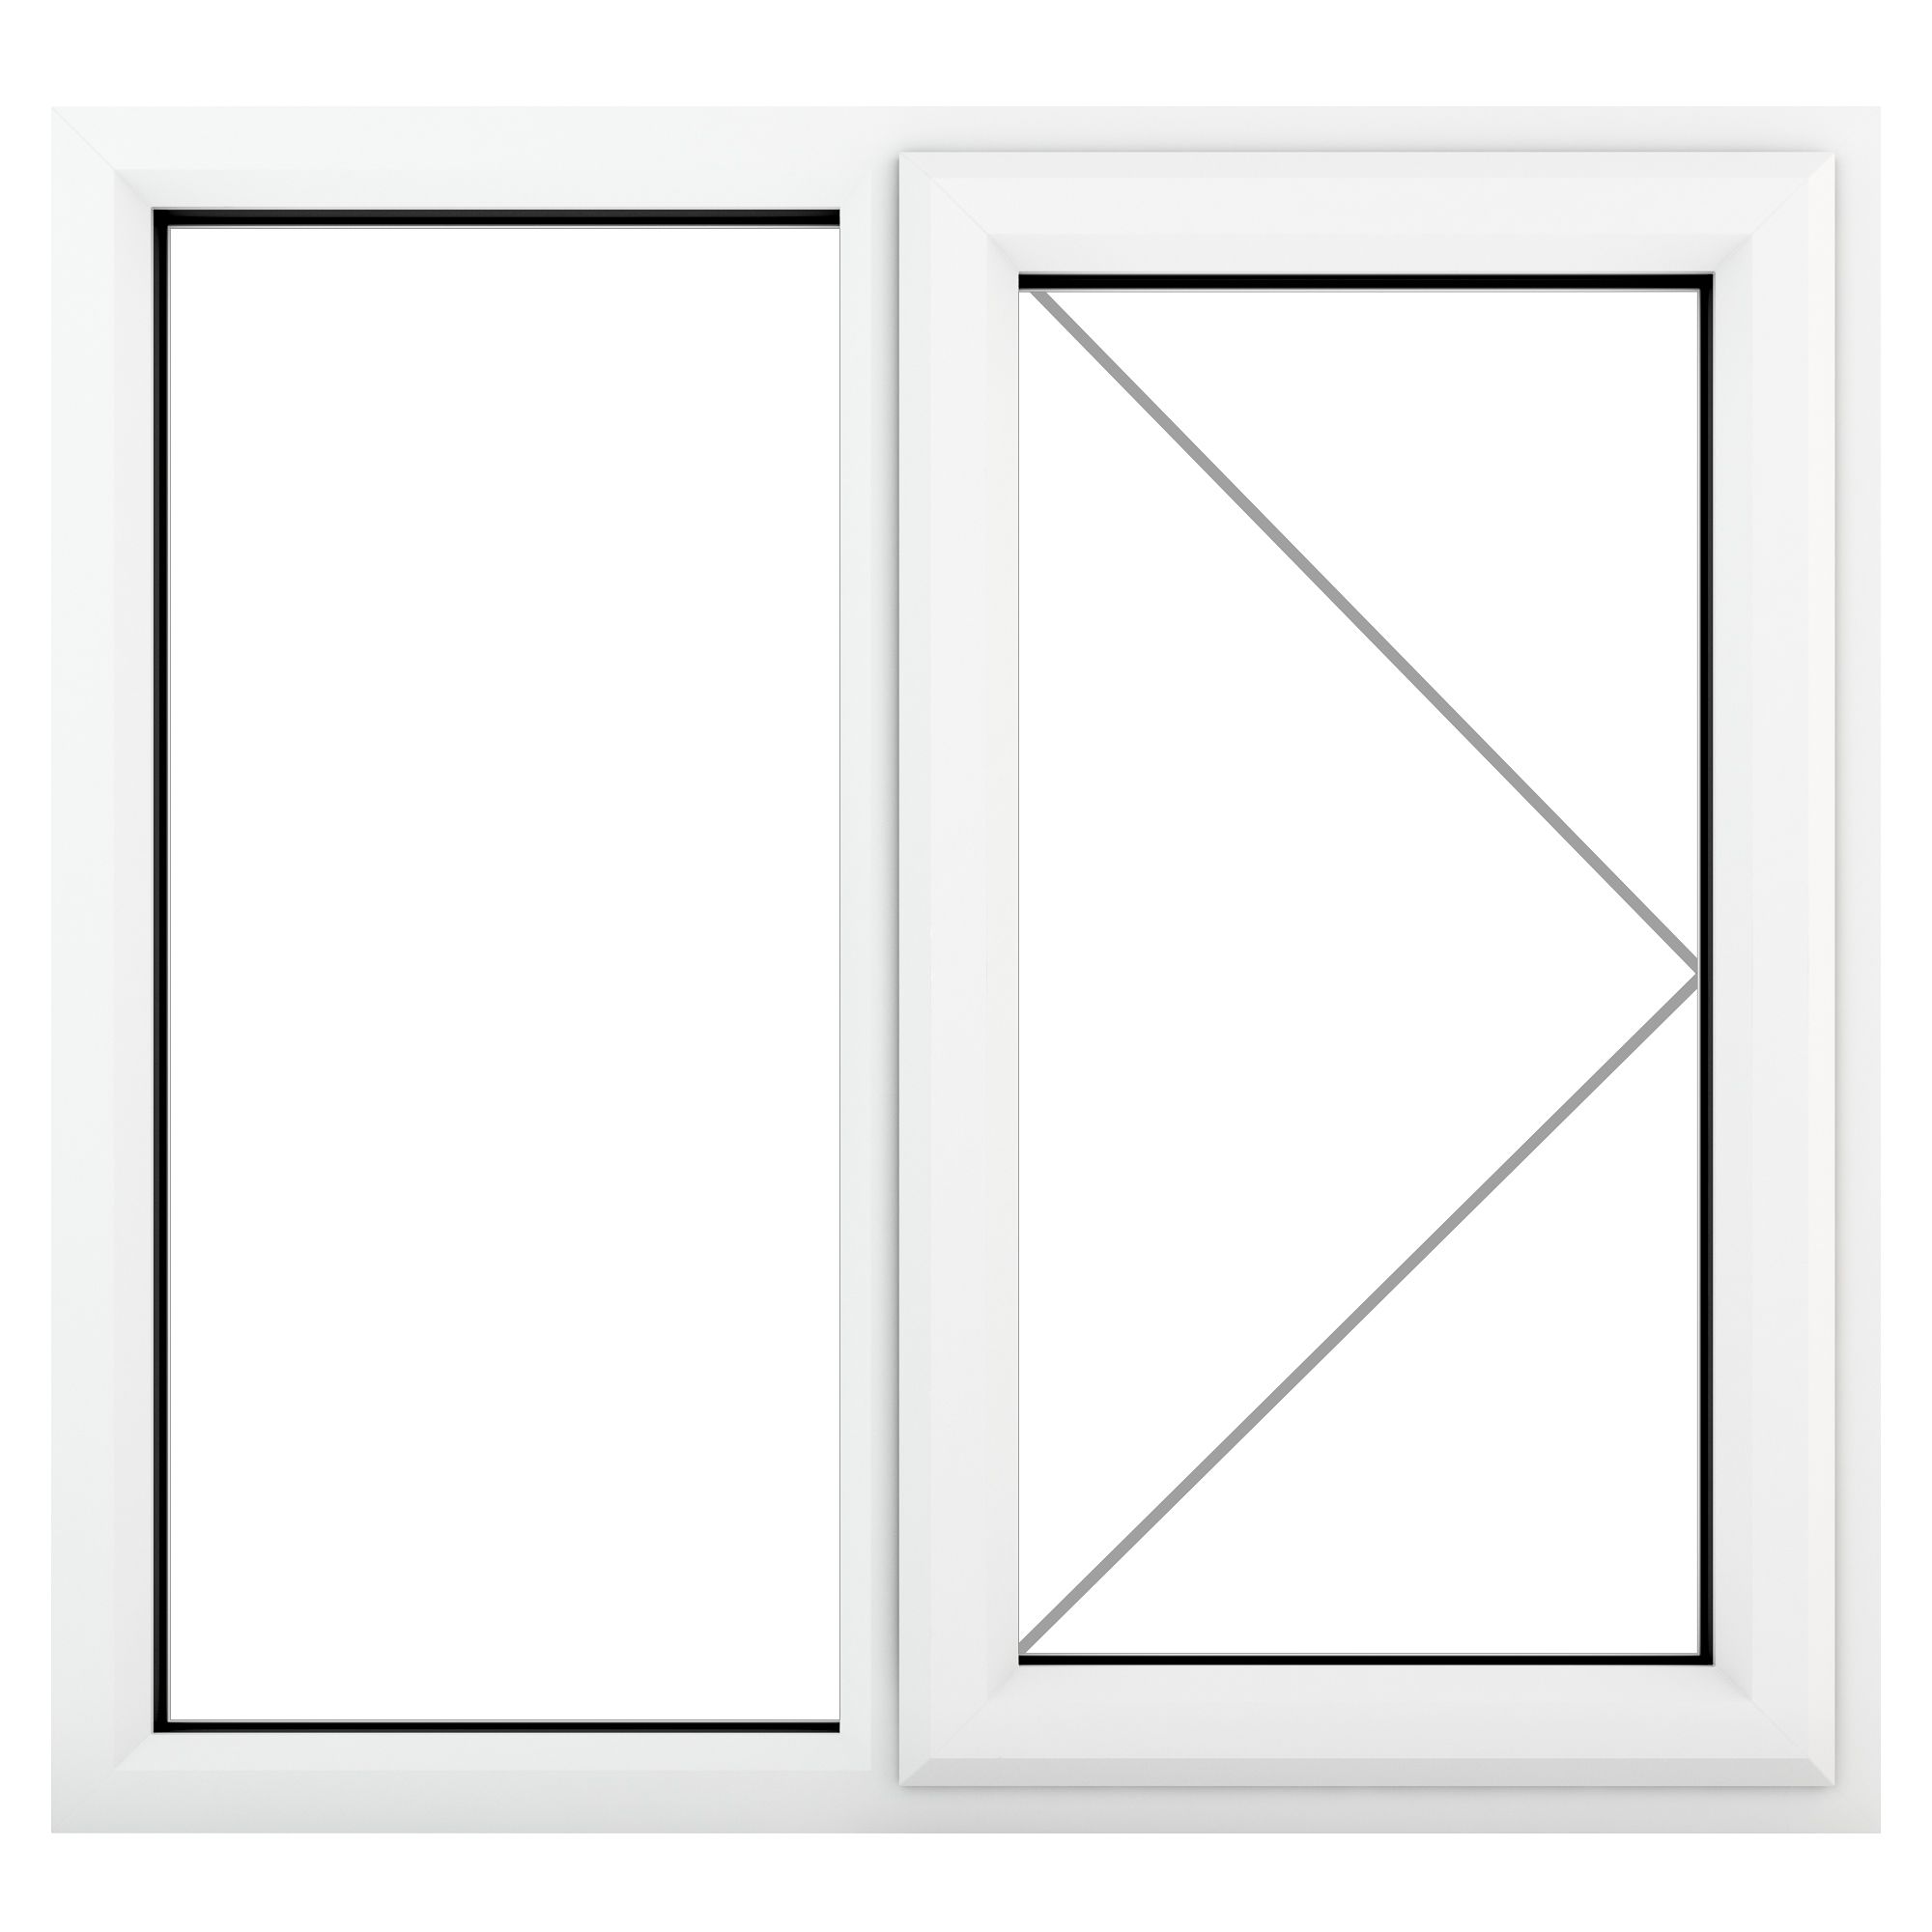 Fortia 2P Clear Glazed White uPVC Right-handed Swinging Window, (H)1190mm (W)1190mm